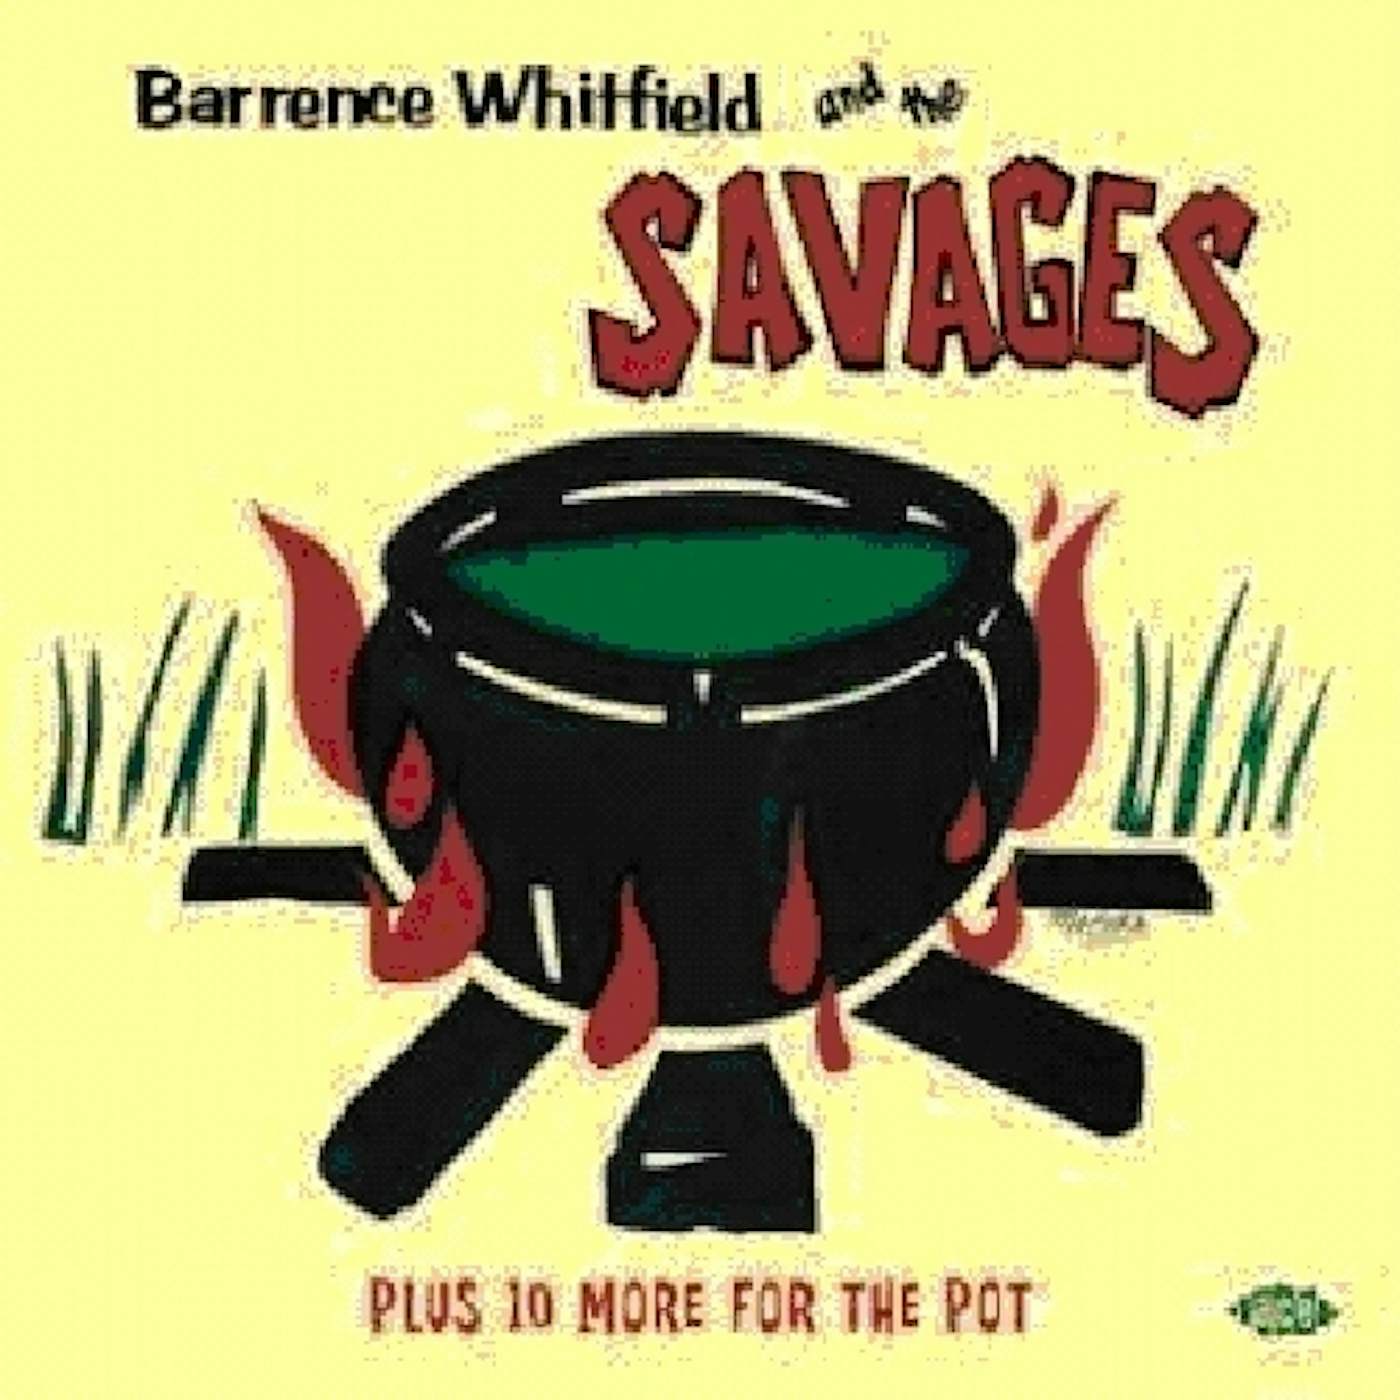 BARRENCE WHITFIELD & THE SAVAGES CD